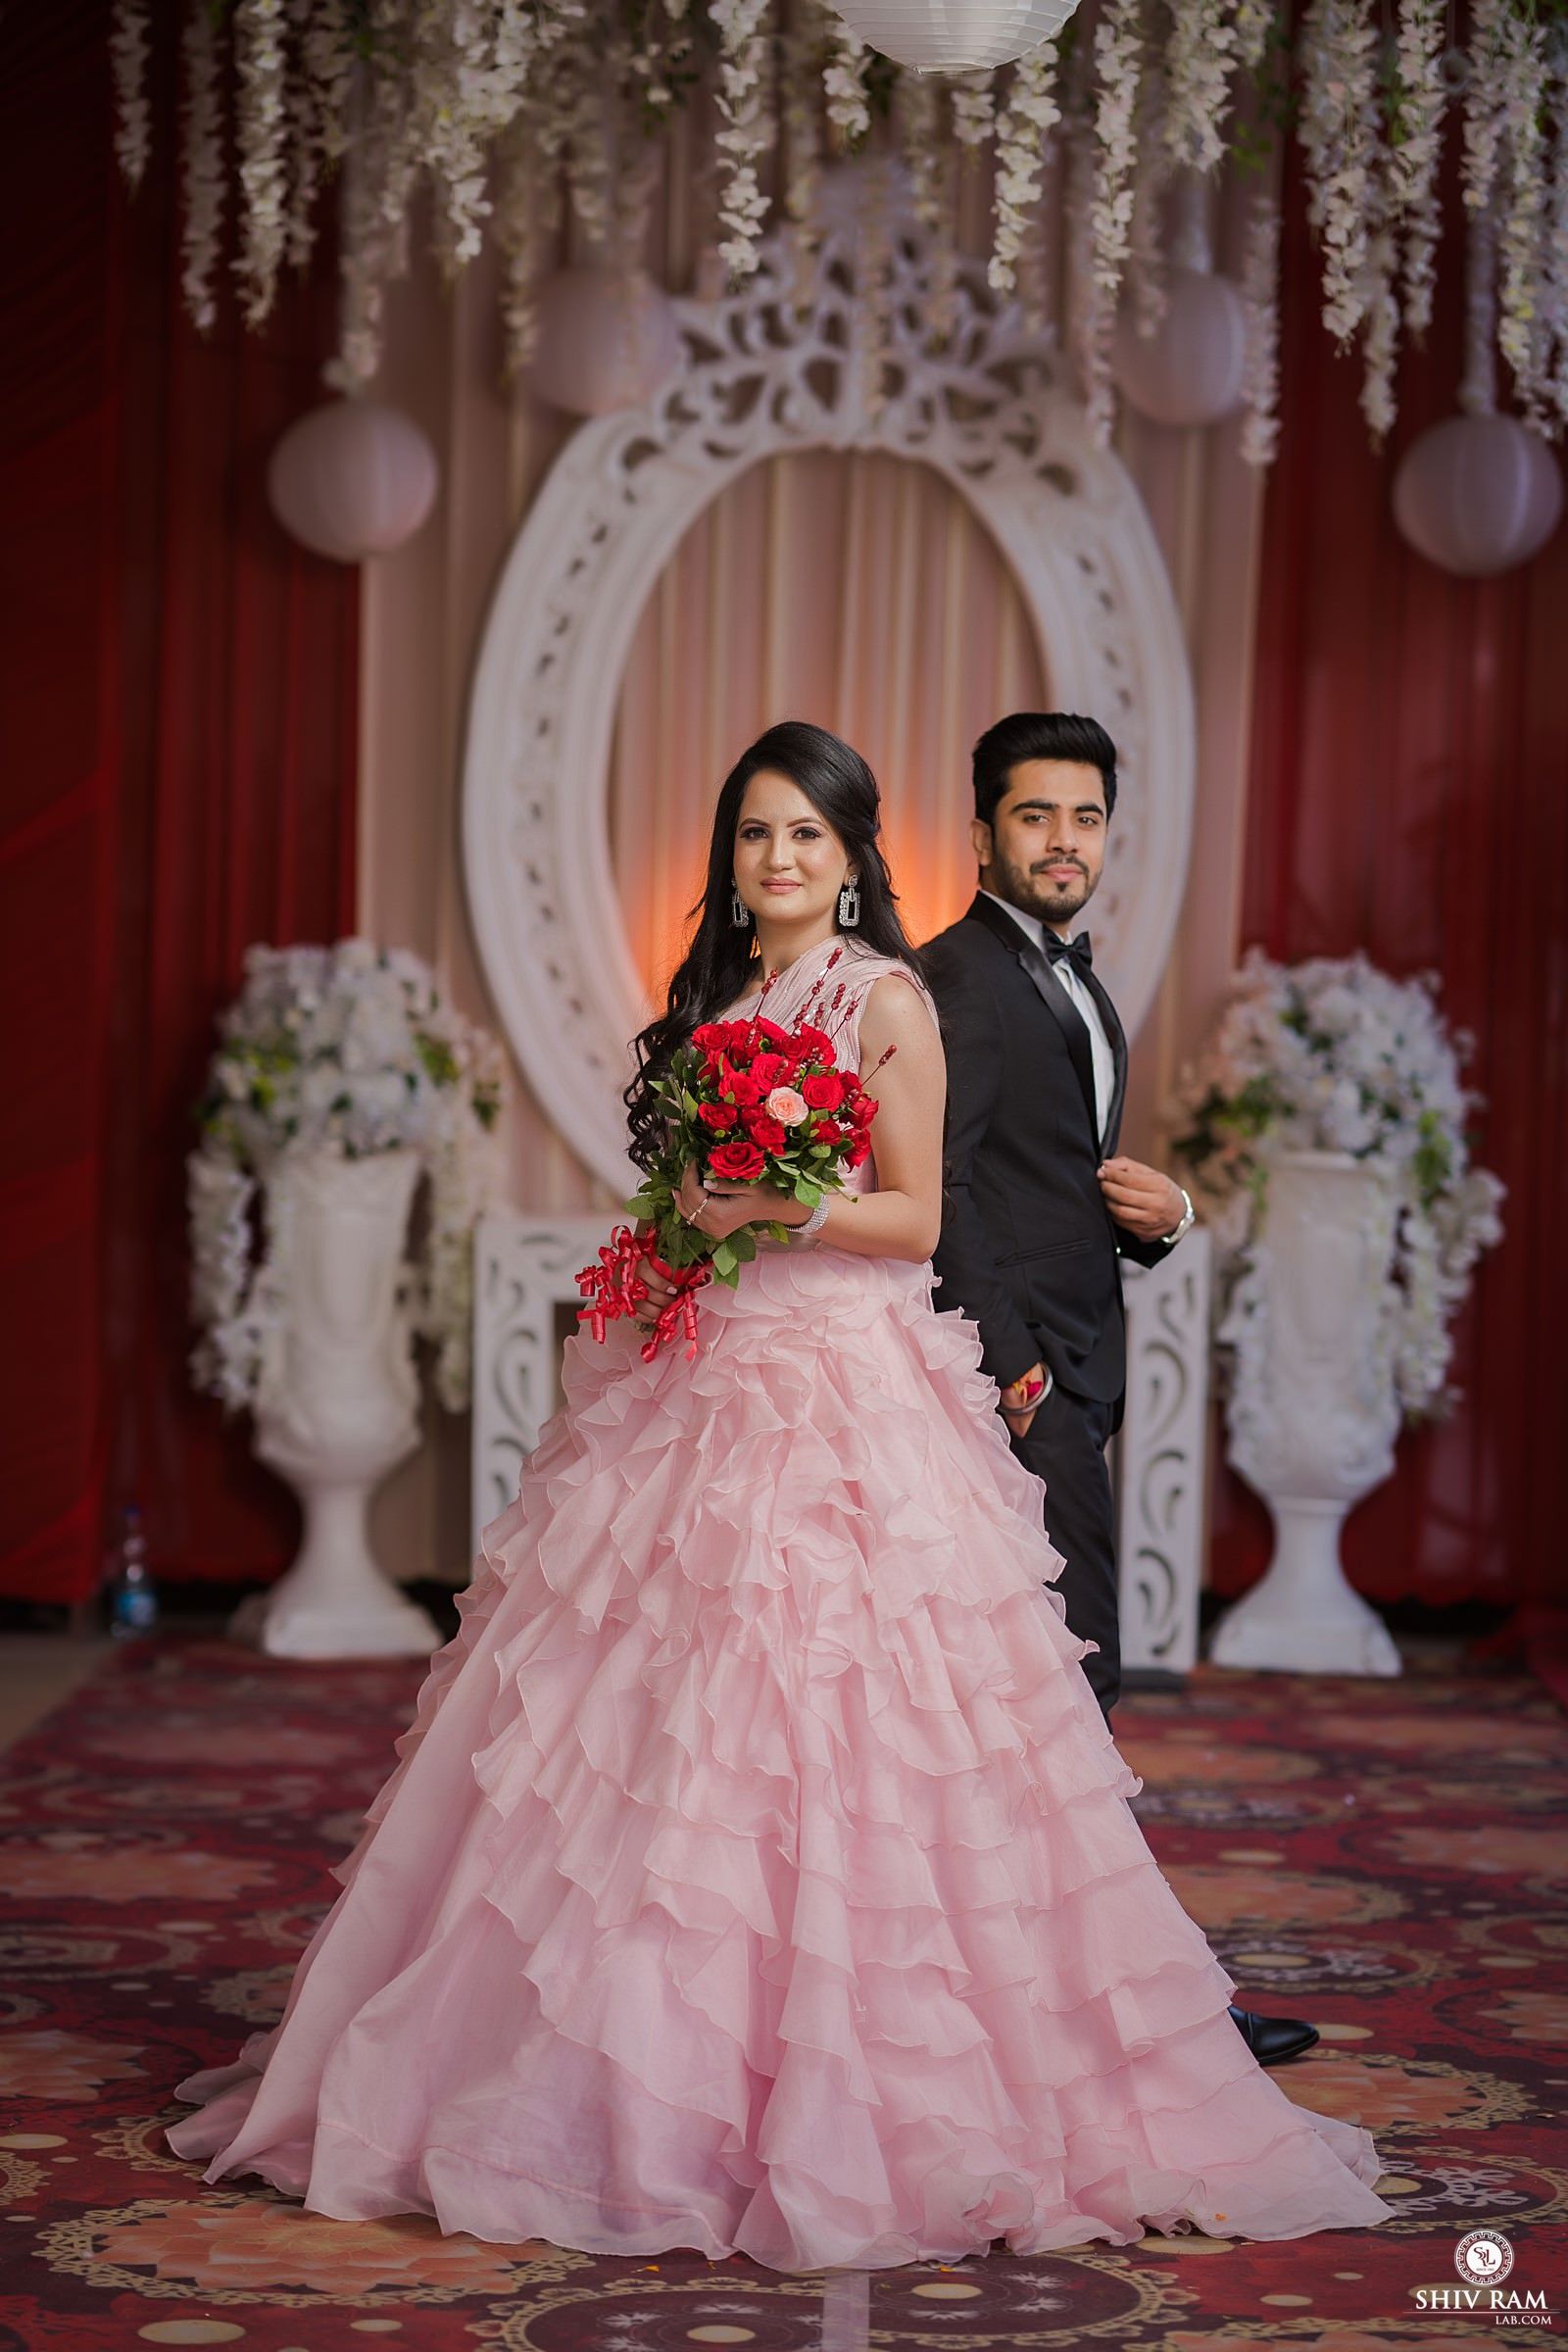 Buy Pastel Pink Engagement Dress Online in India  Etsy